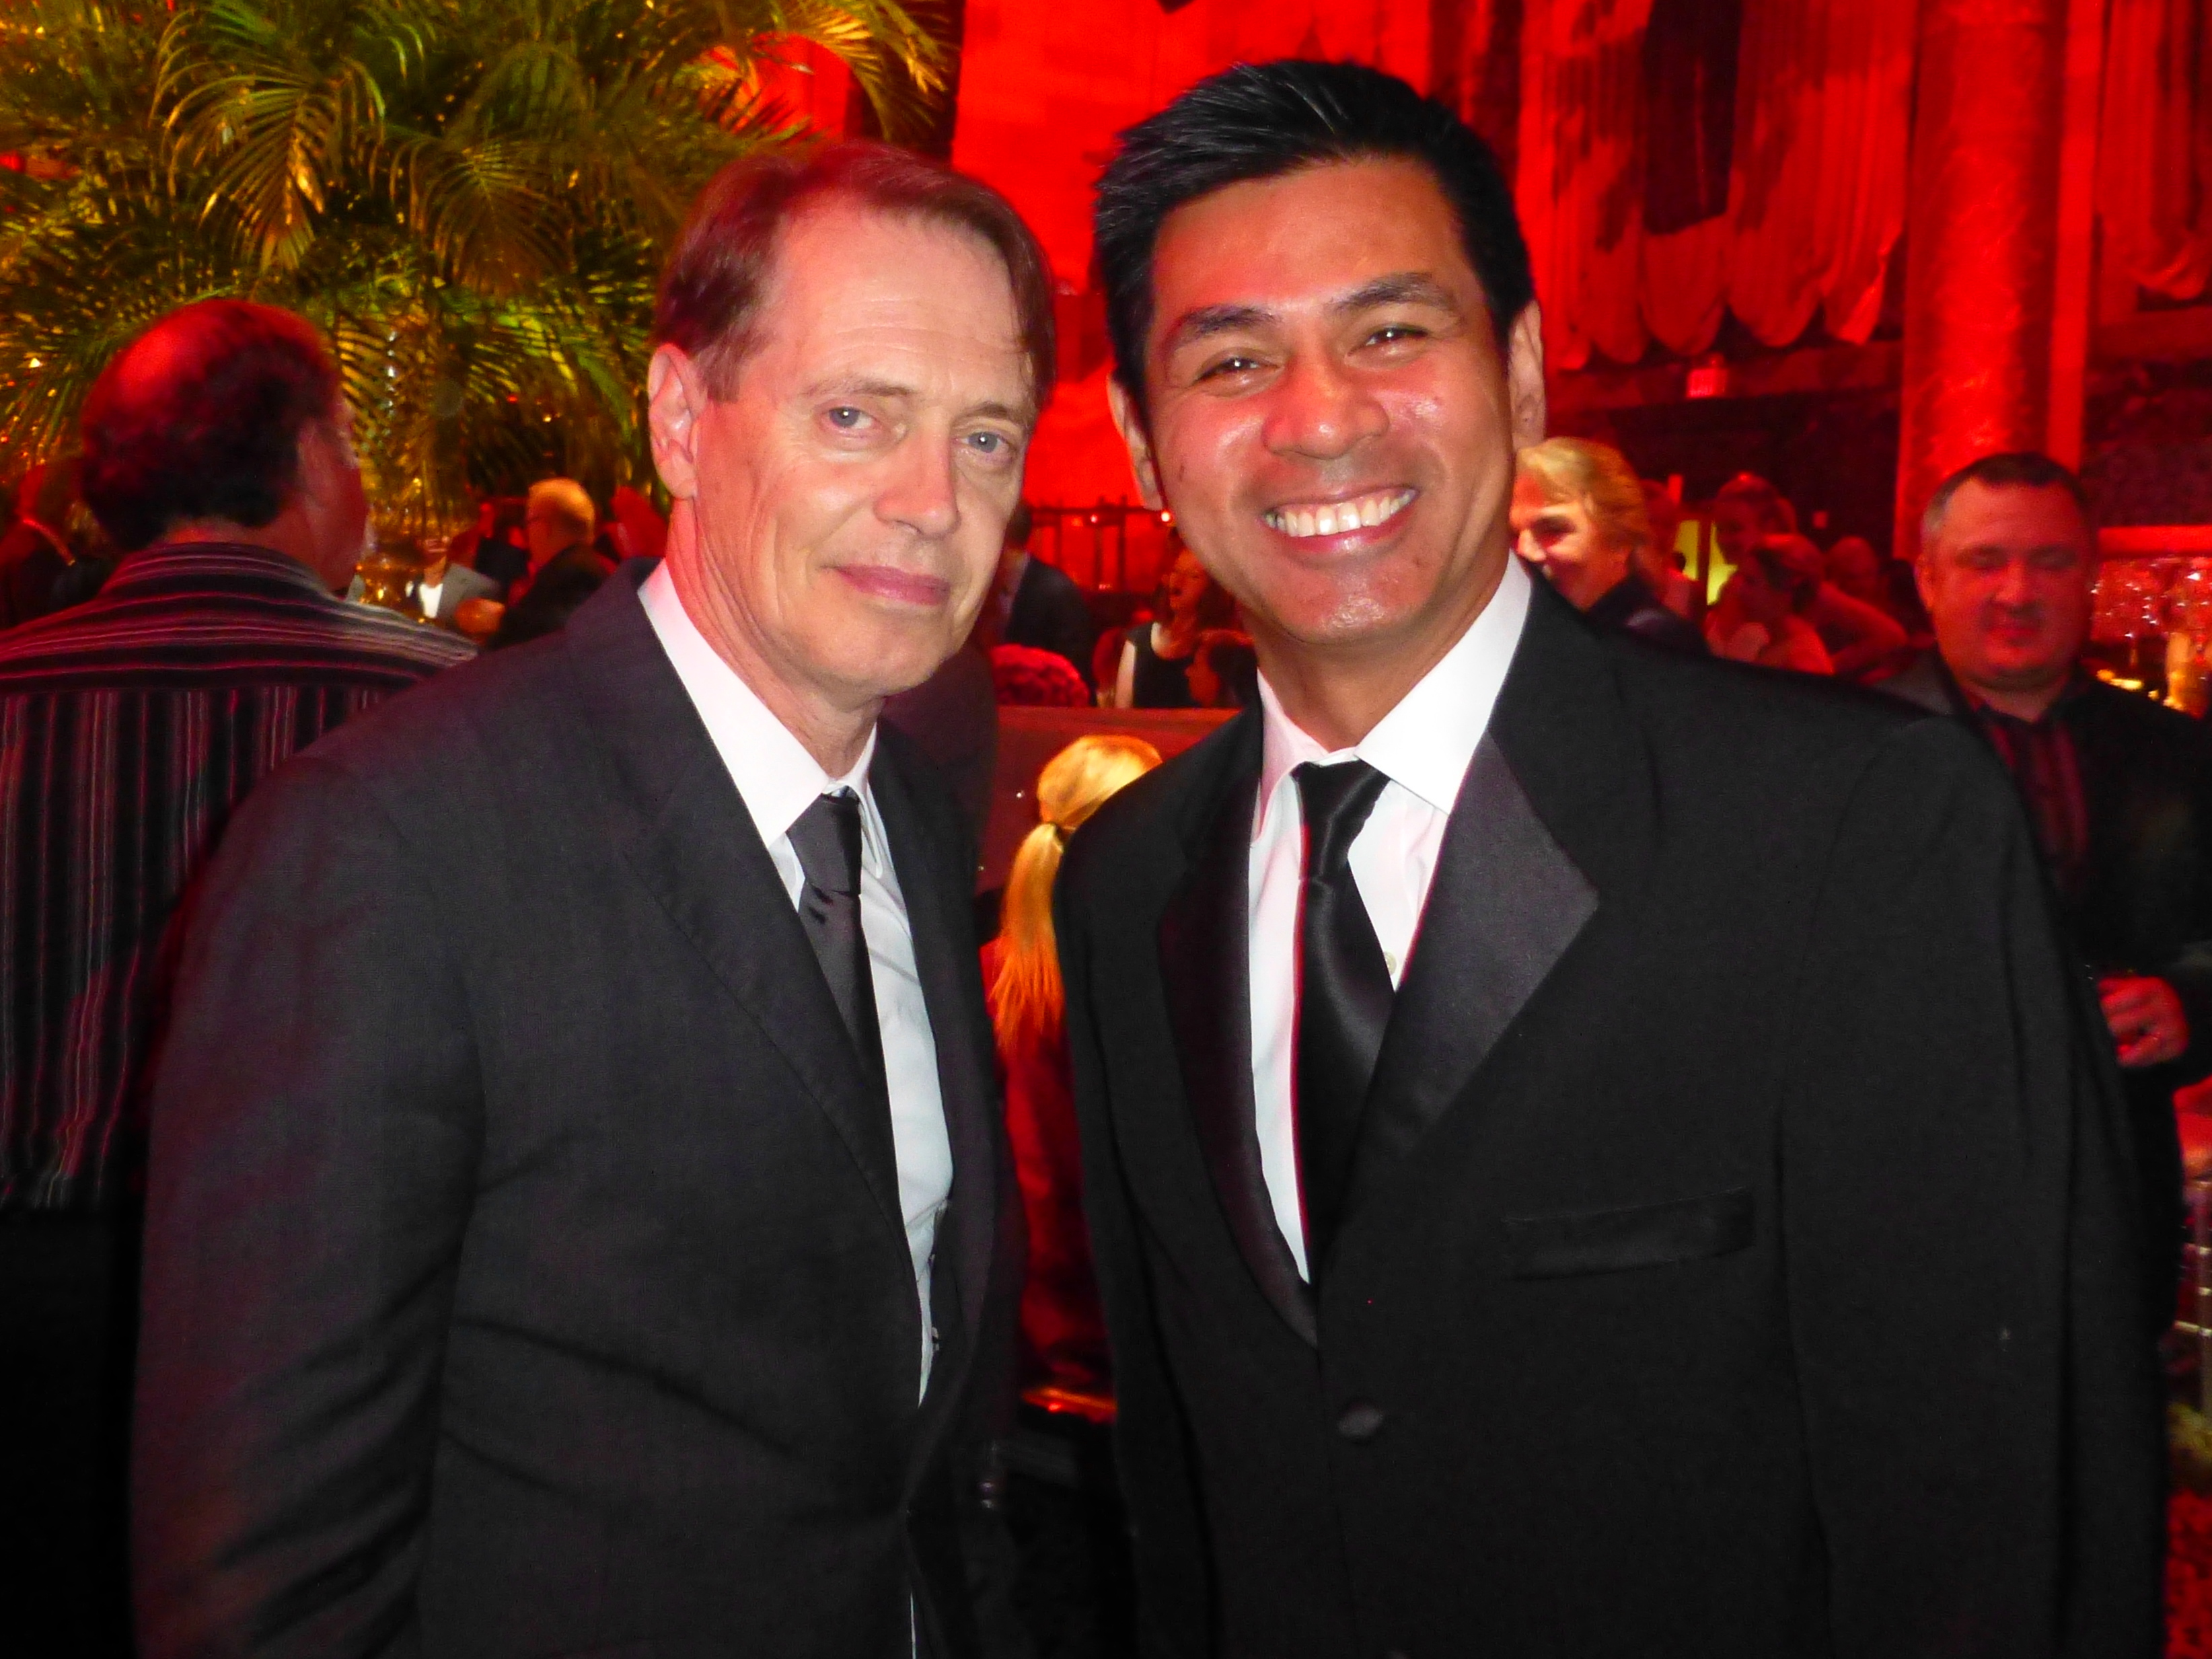 Steve Buscemi who plays Enoch 'Nucky' Thompson on Boardwalk Empire at the wrap party